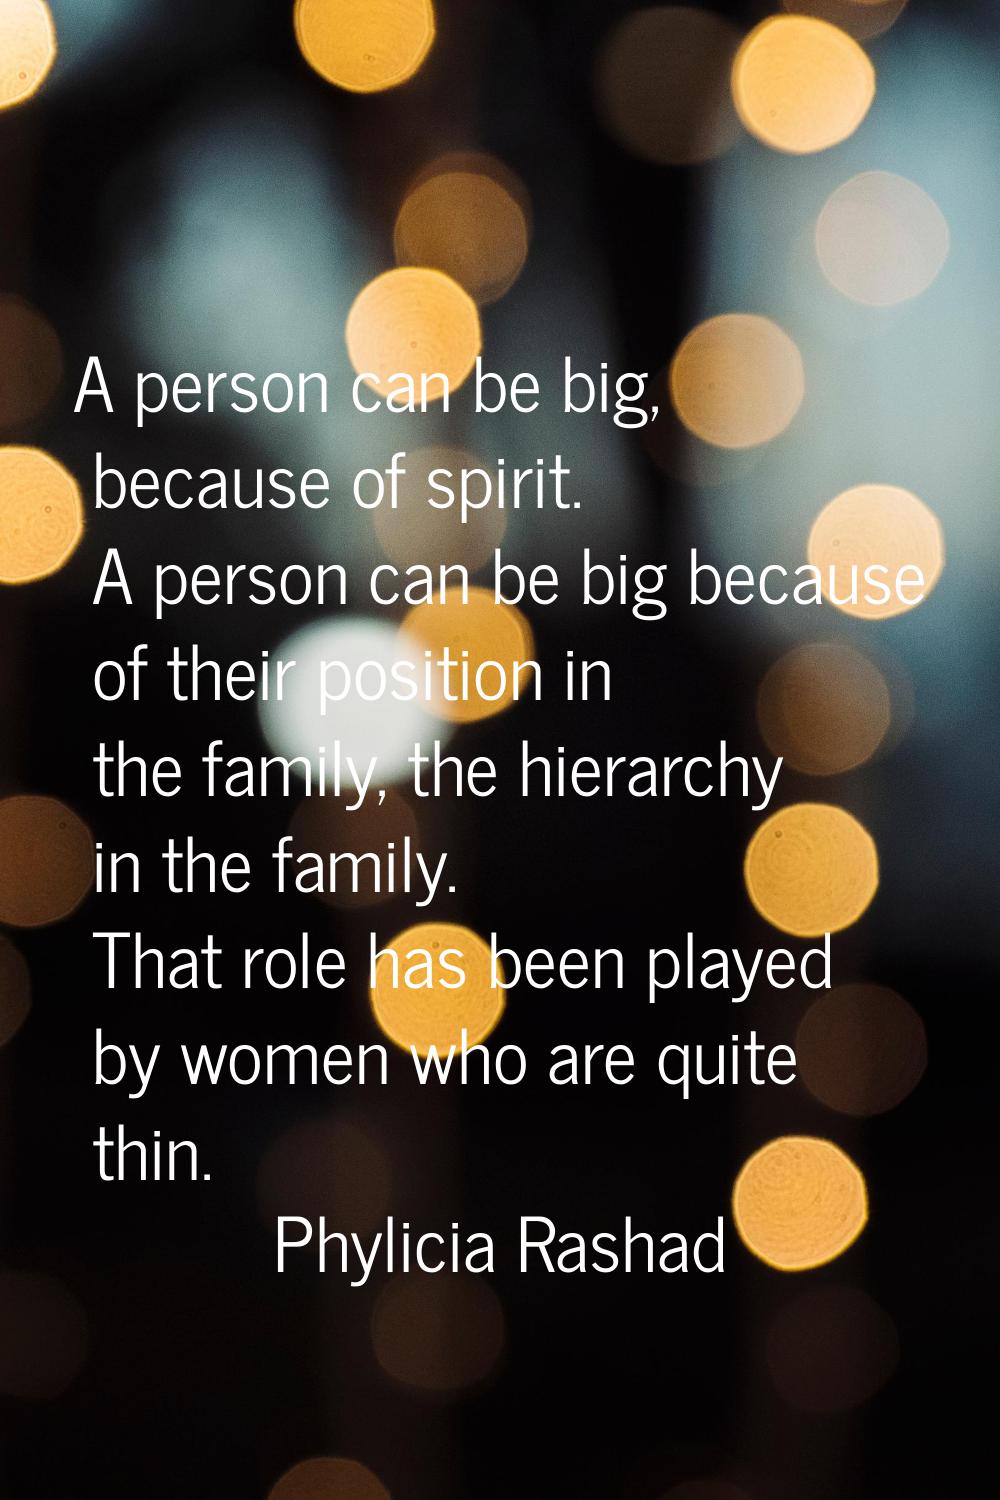 A person can be big, because of spirit. A person can be big because of their position in the family